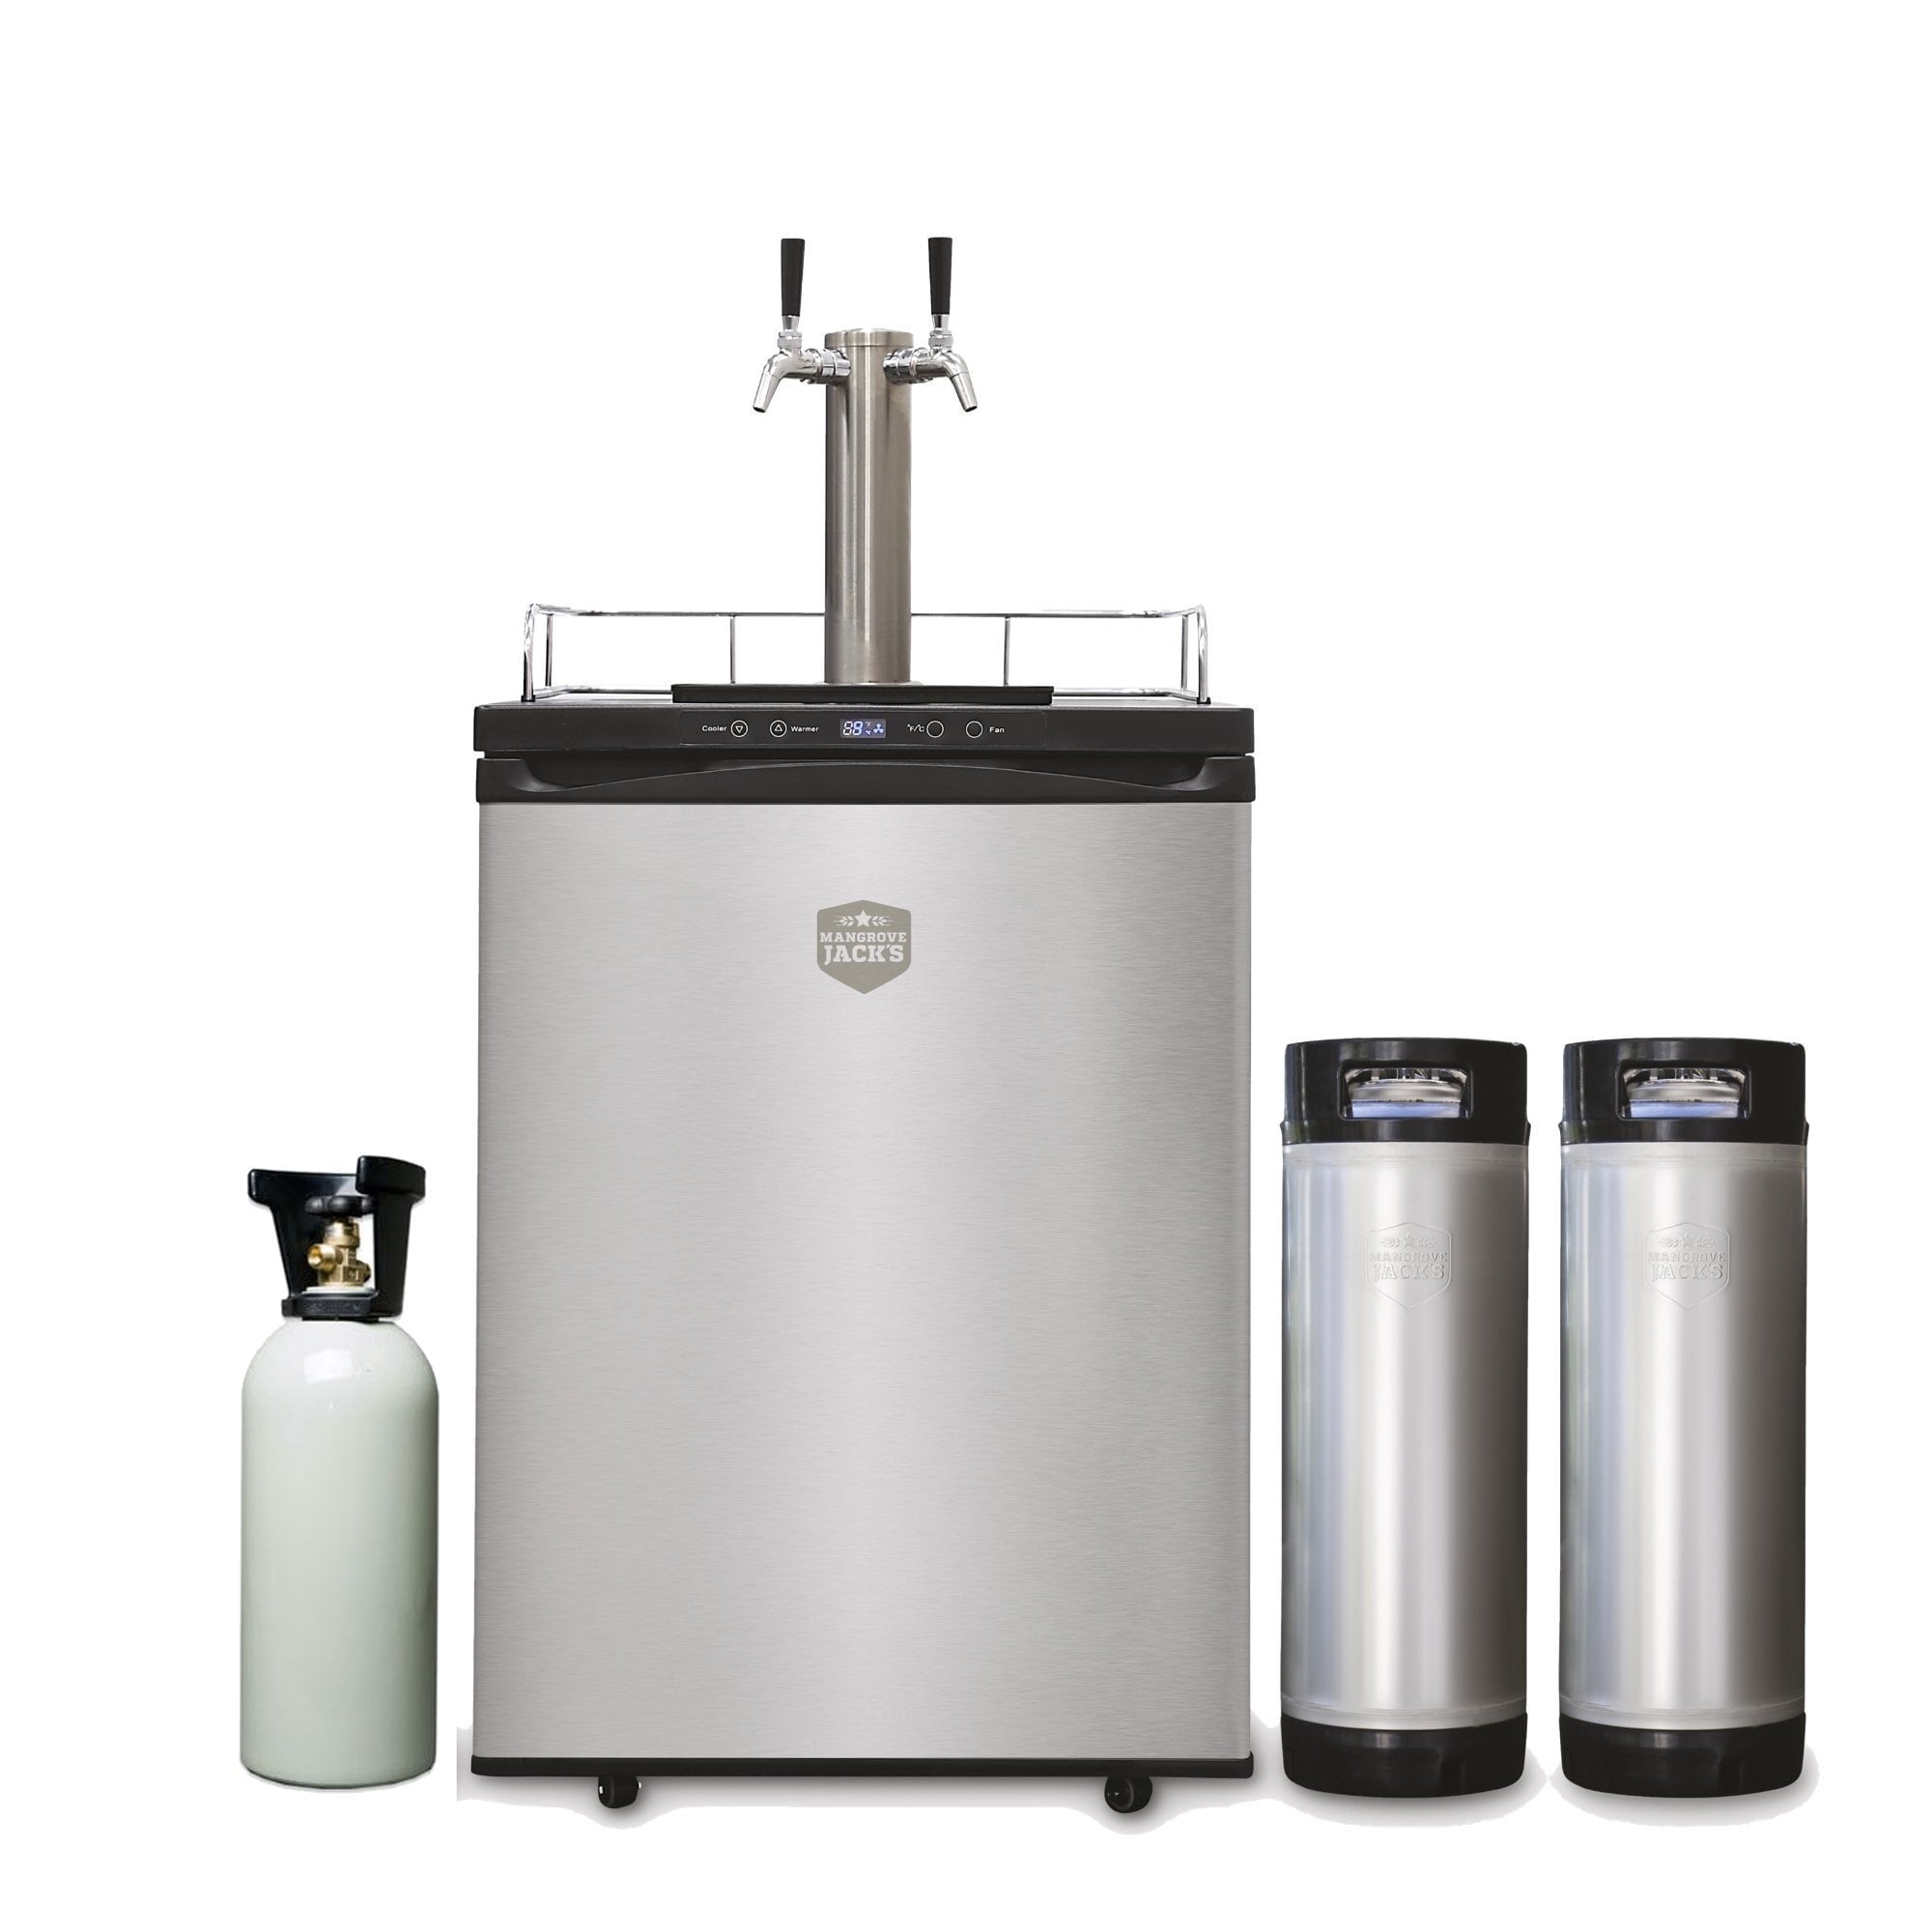 Mangrove Jacks Kegerator Double Tap 2x Taps with 2 New Kegs & CO2